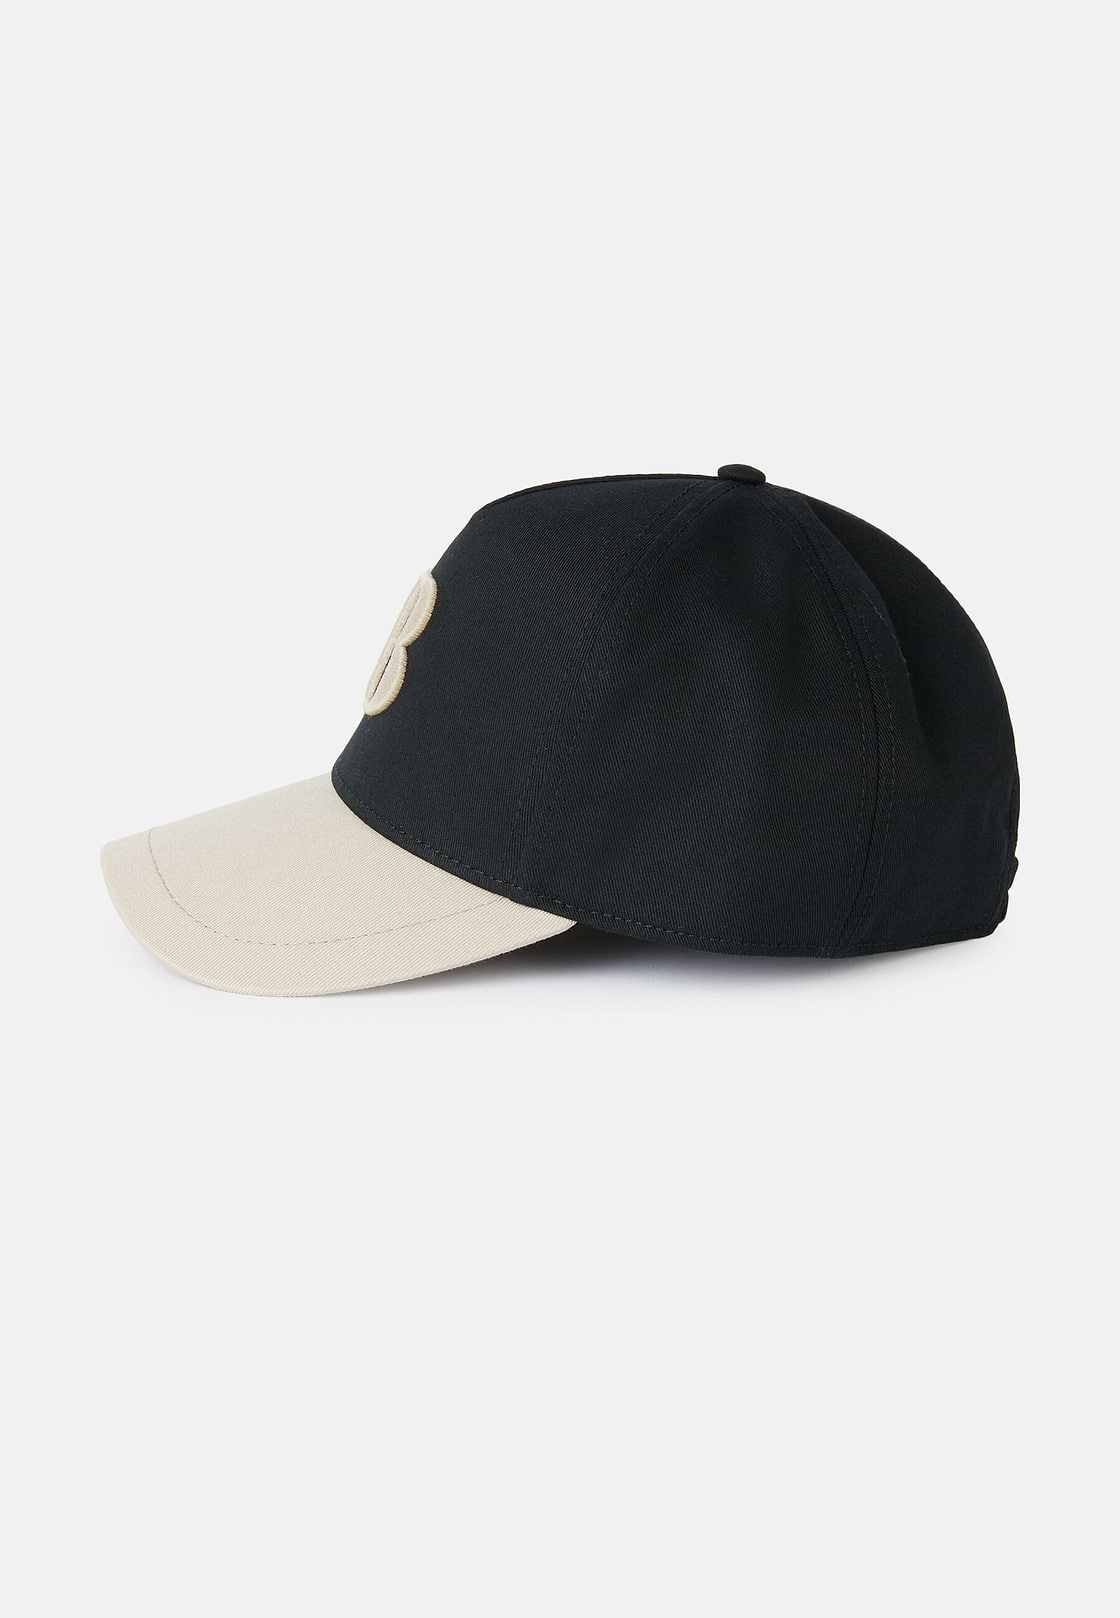 Baseball Cap With Visor And Embroidery in Cotton, Black, hi-res